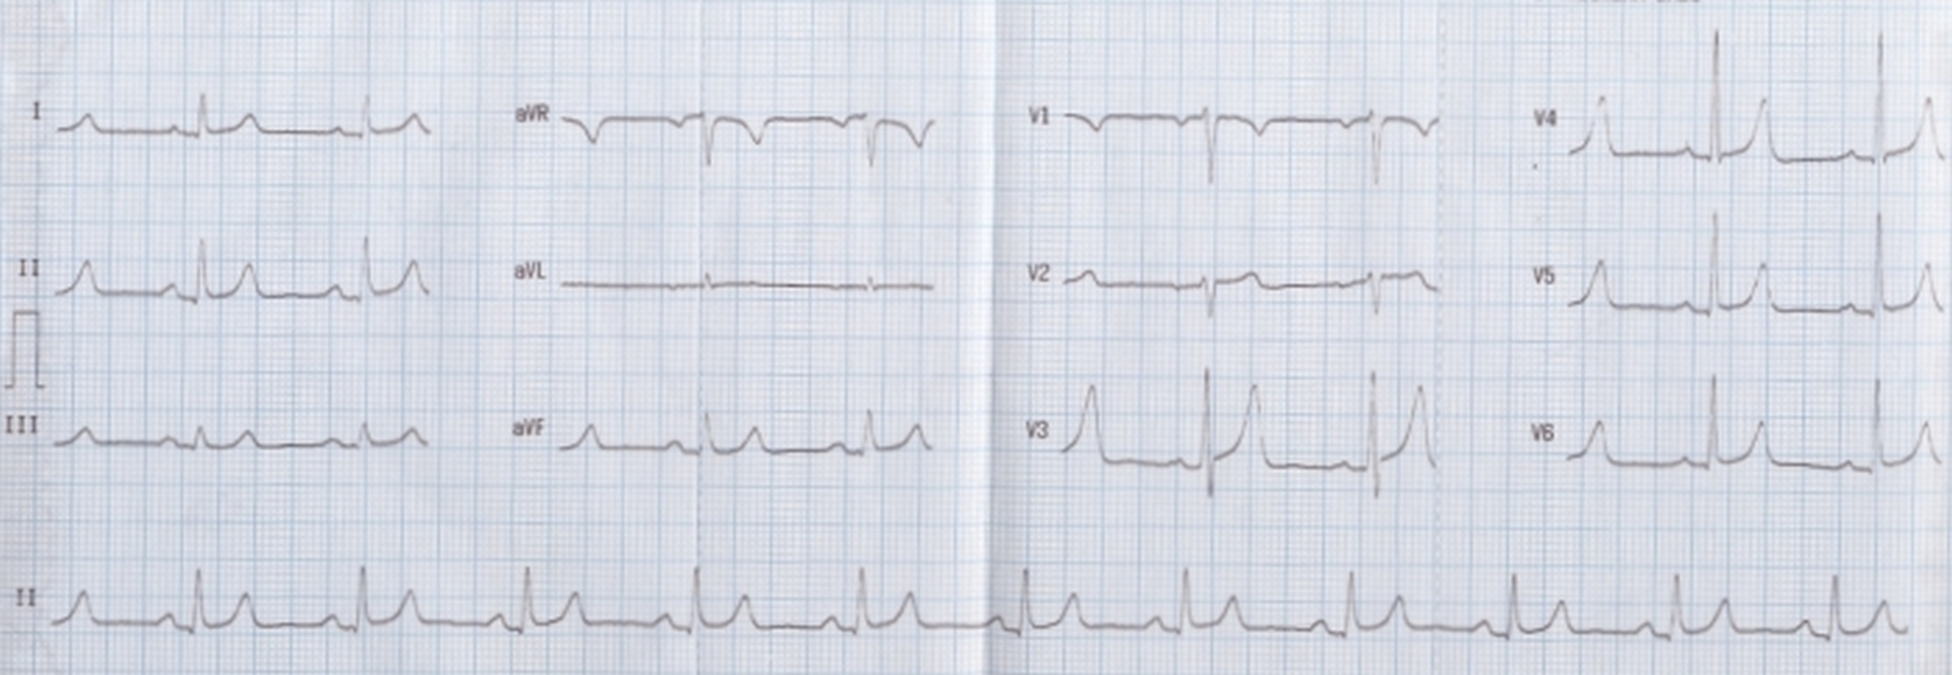 Normal variant ECG with tall T waves